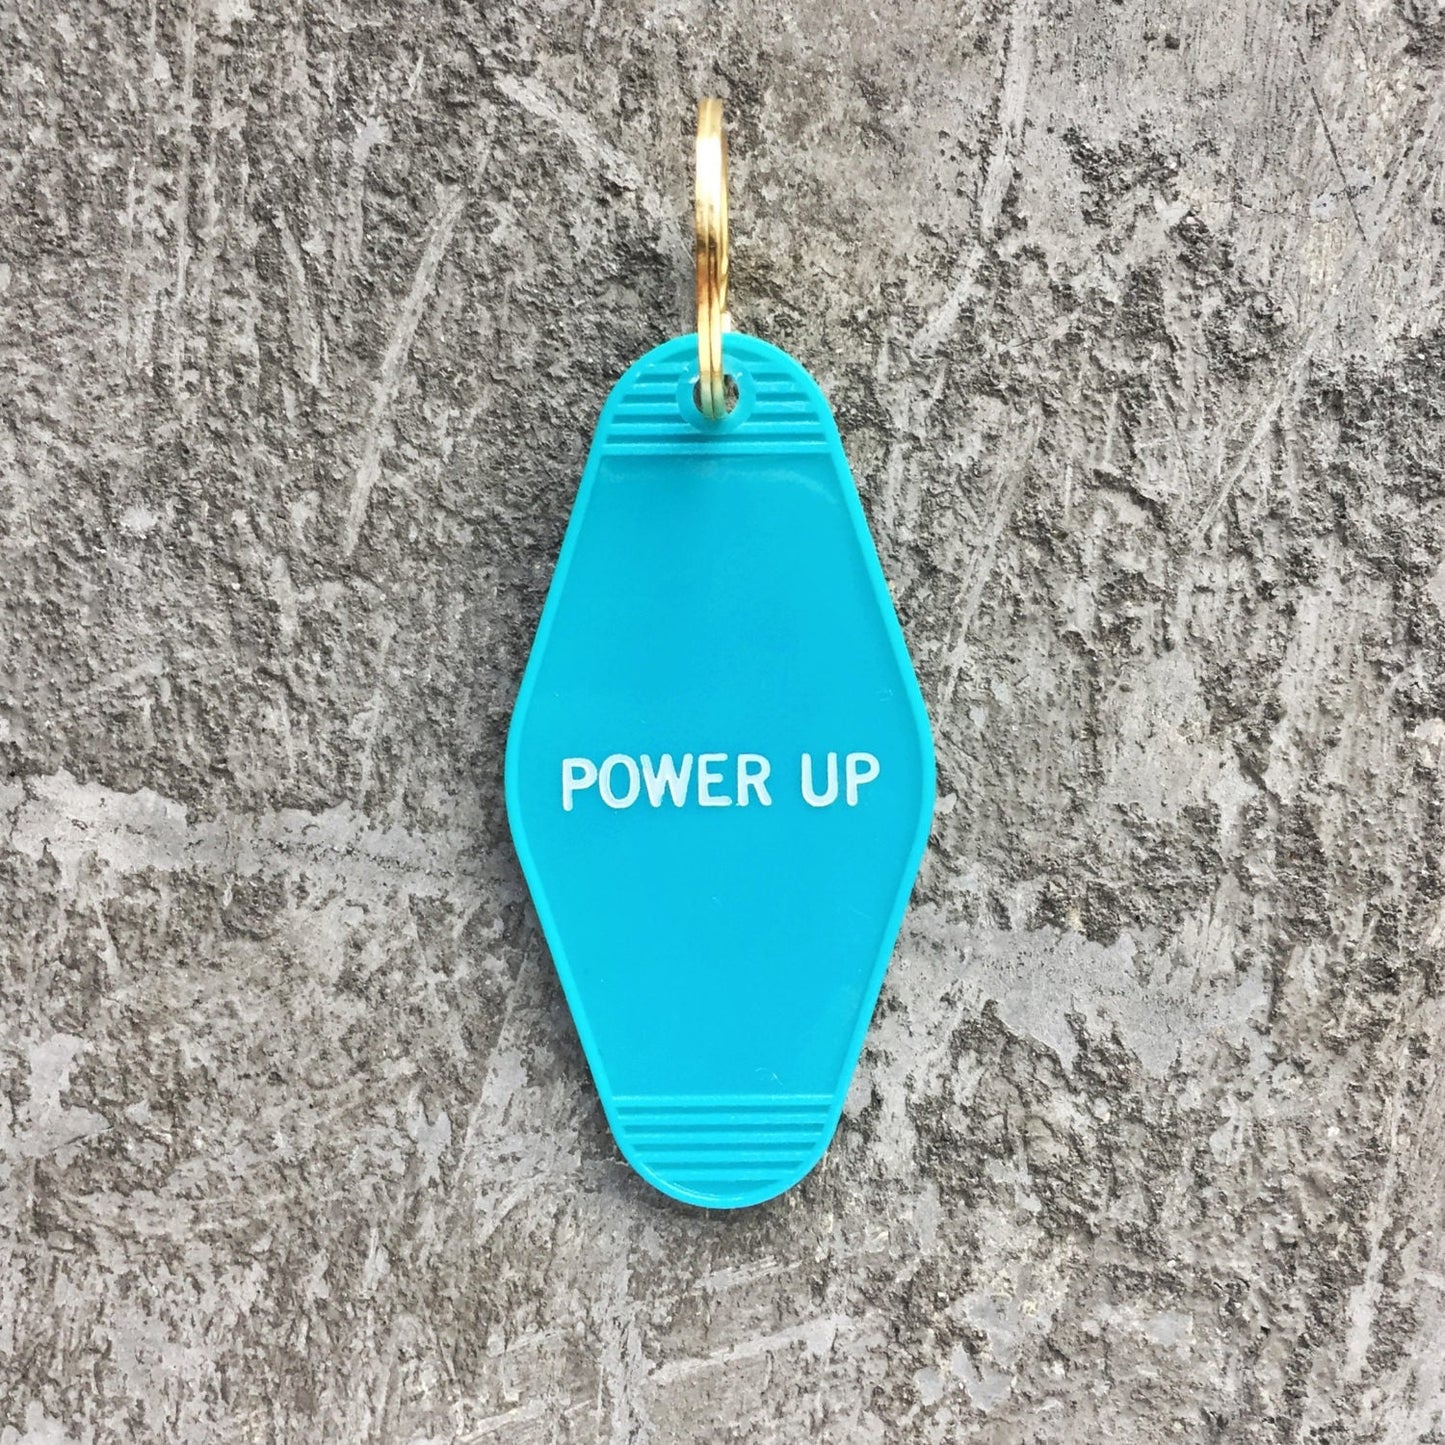 Power Up Keychain in Turquoise